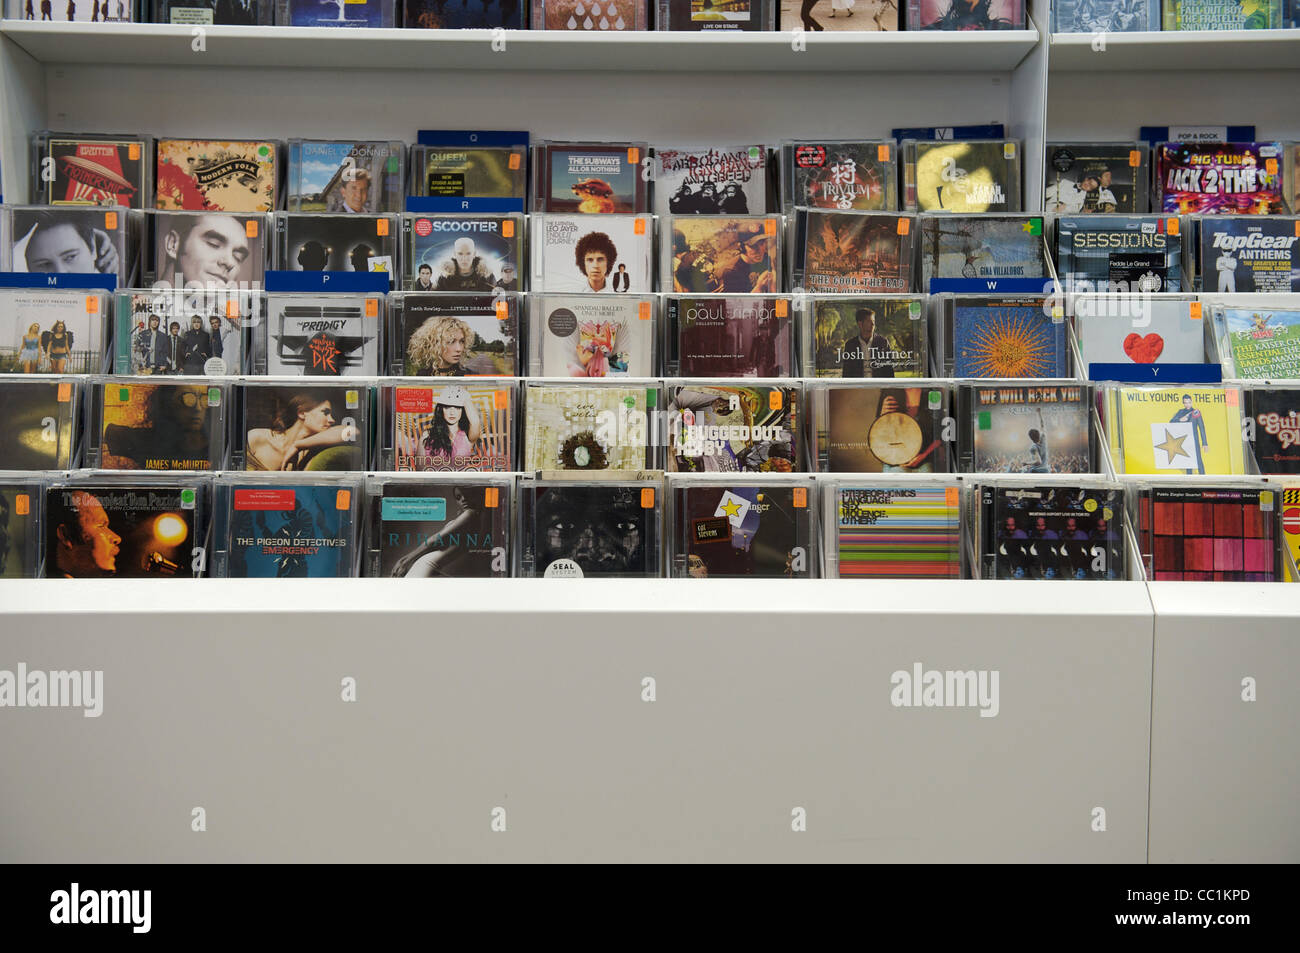 Rack of music CDs in a library Stock Photo